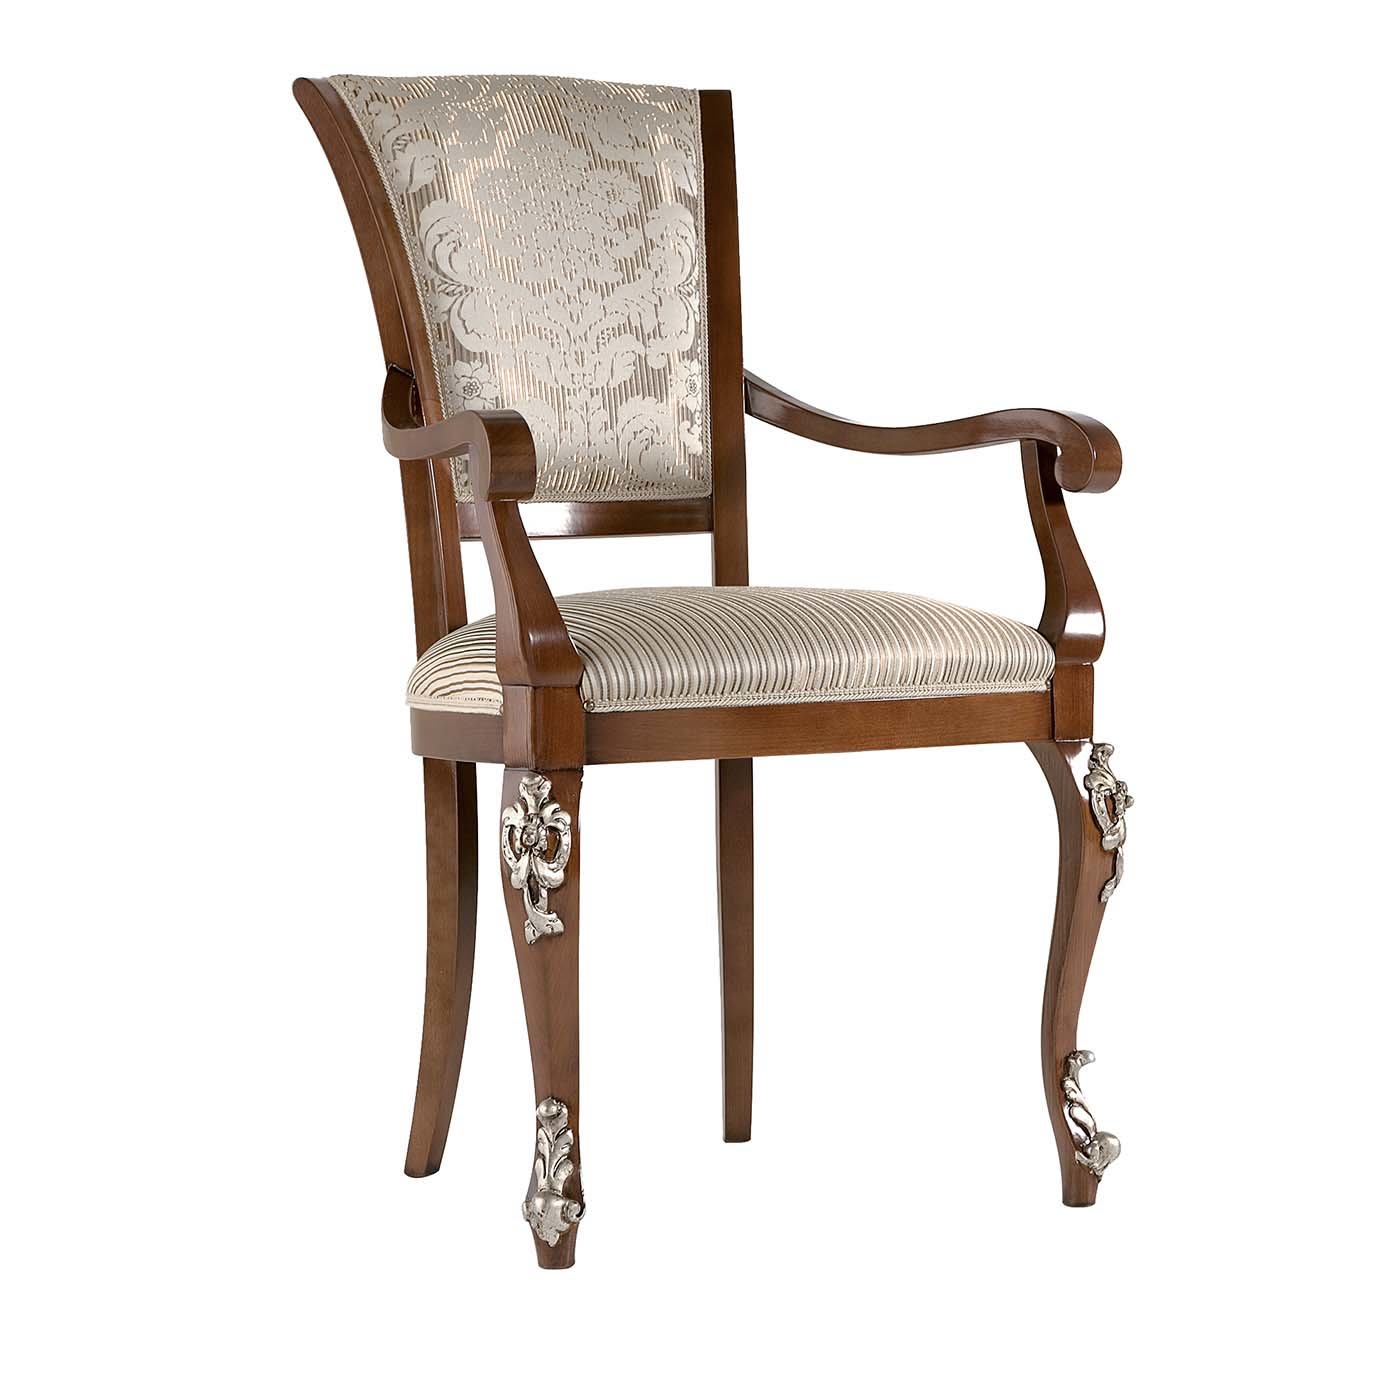 Set of 4 Baroque Style Dining Chairs with Armrests - Modenese Gastone